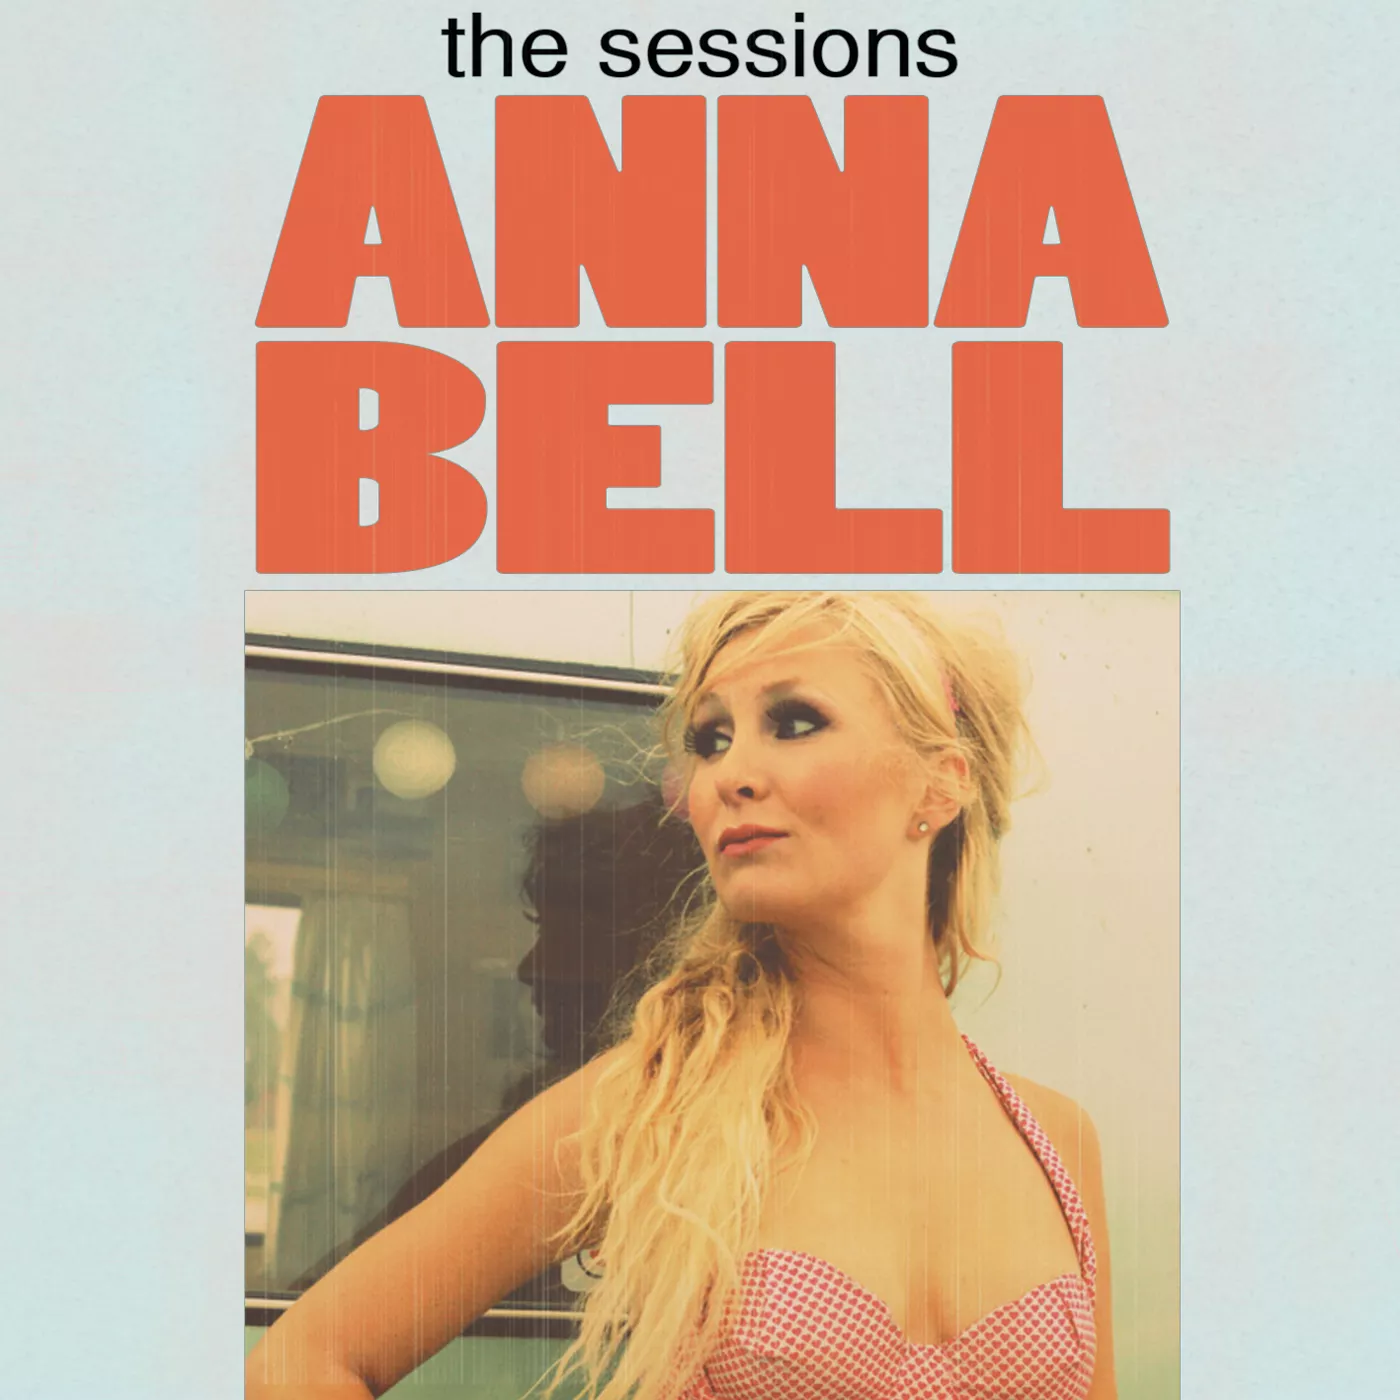 The Sessions - Anna Bell